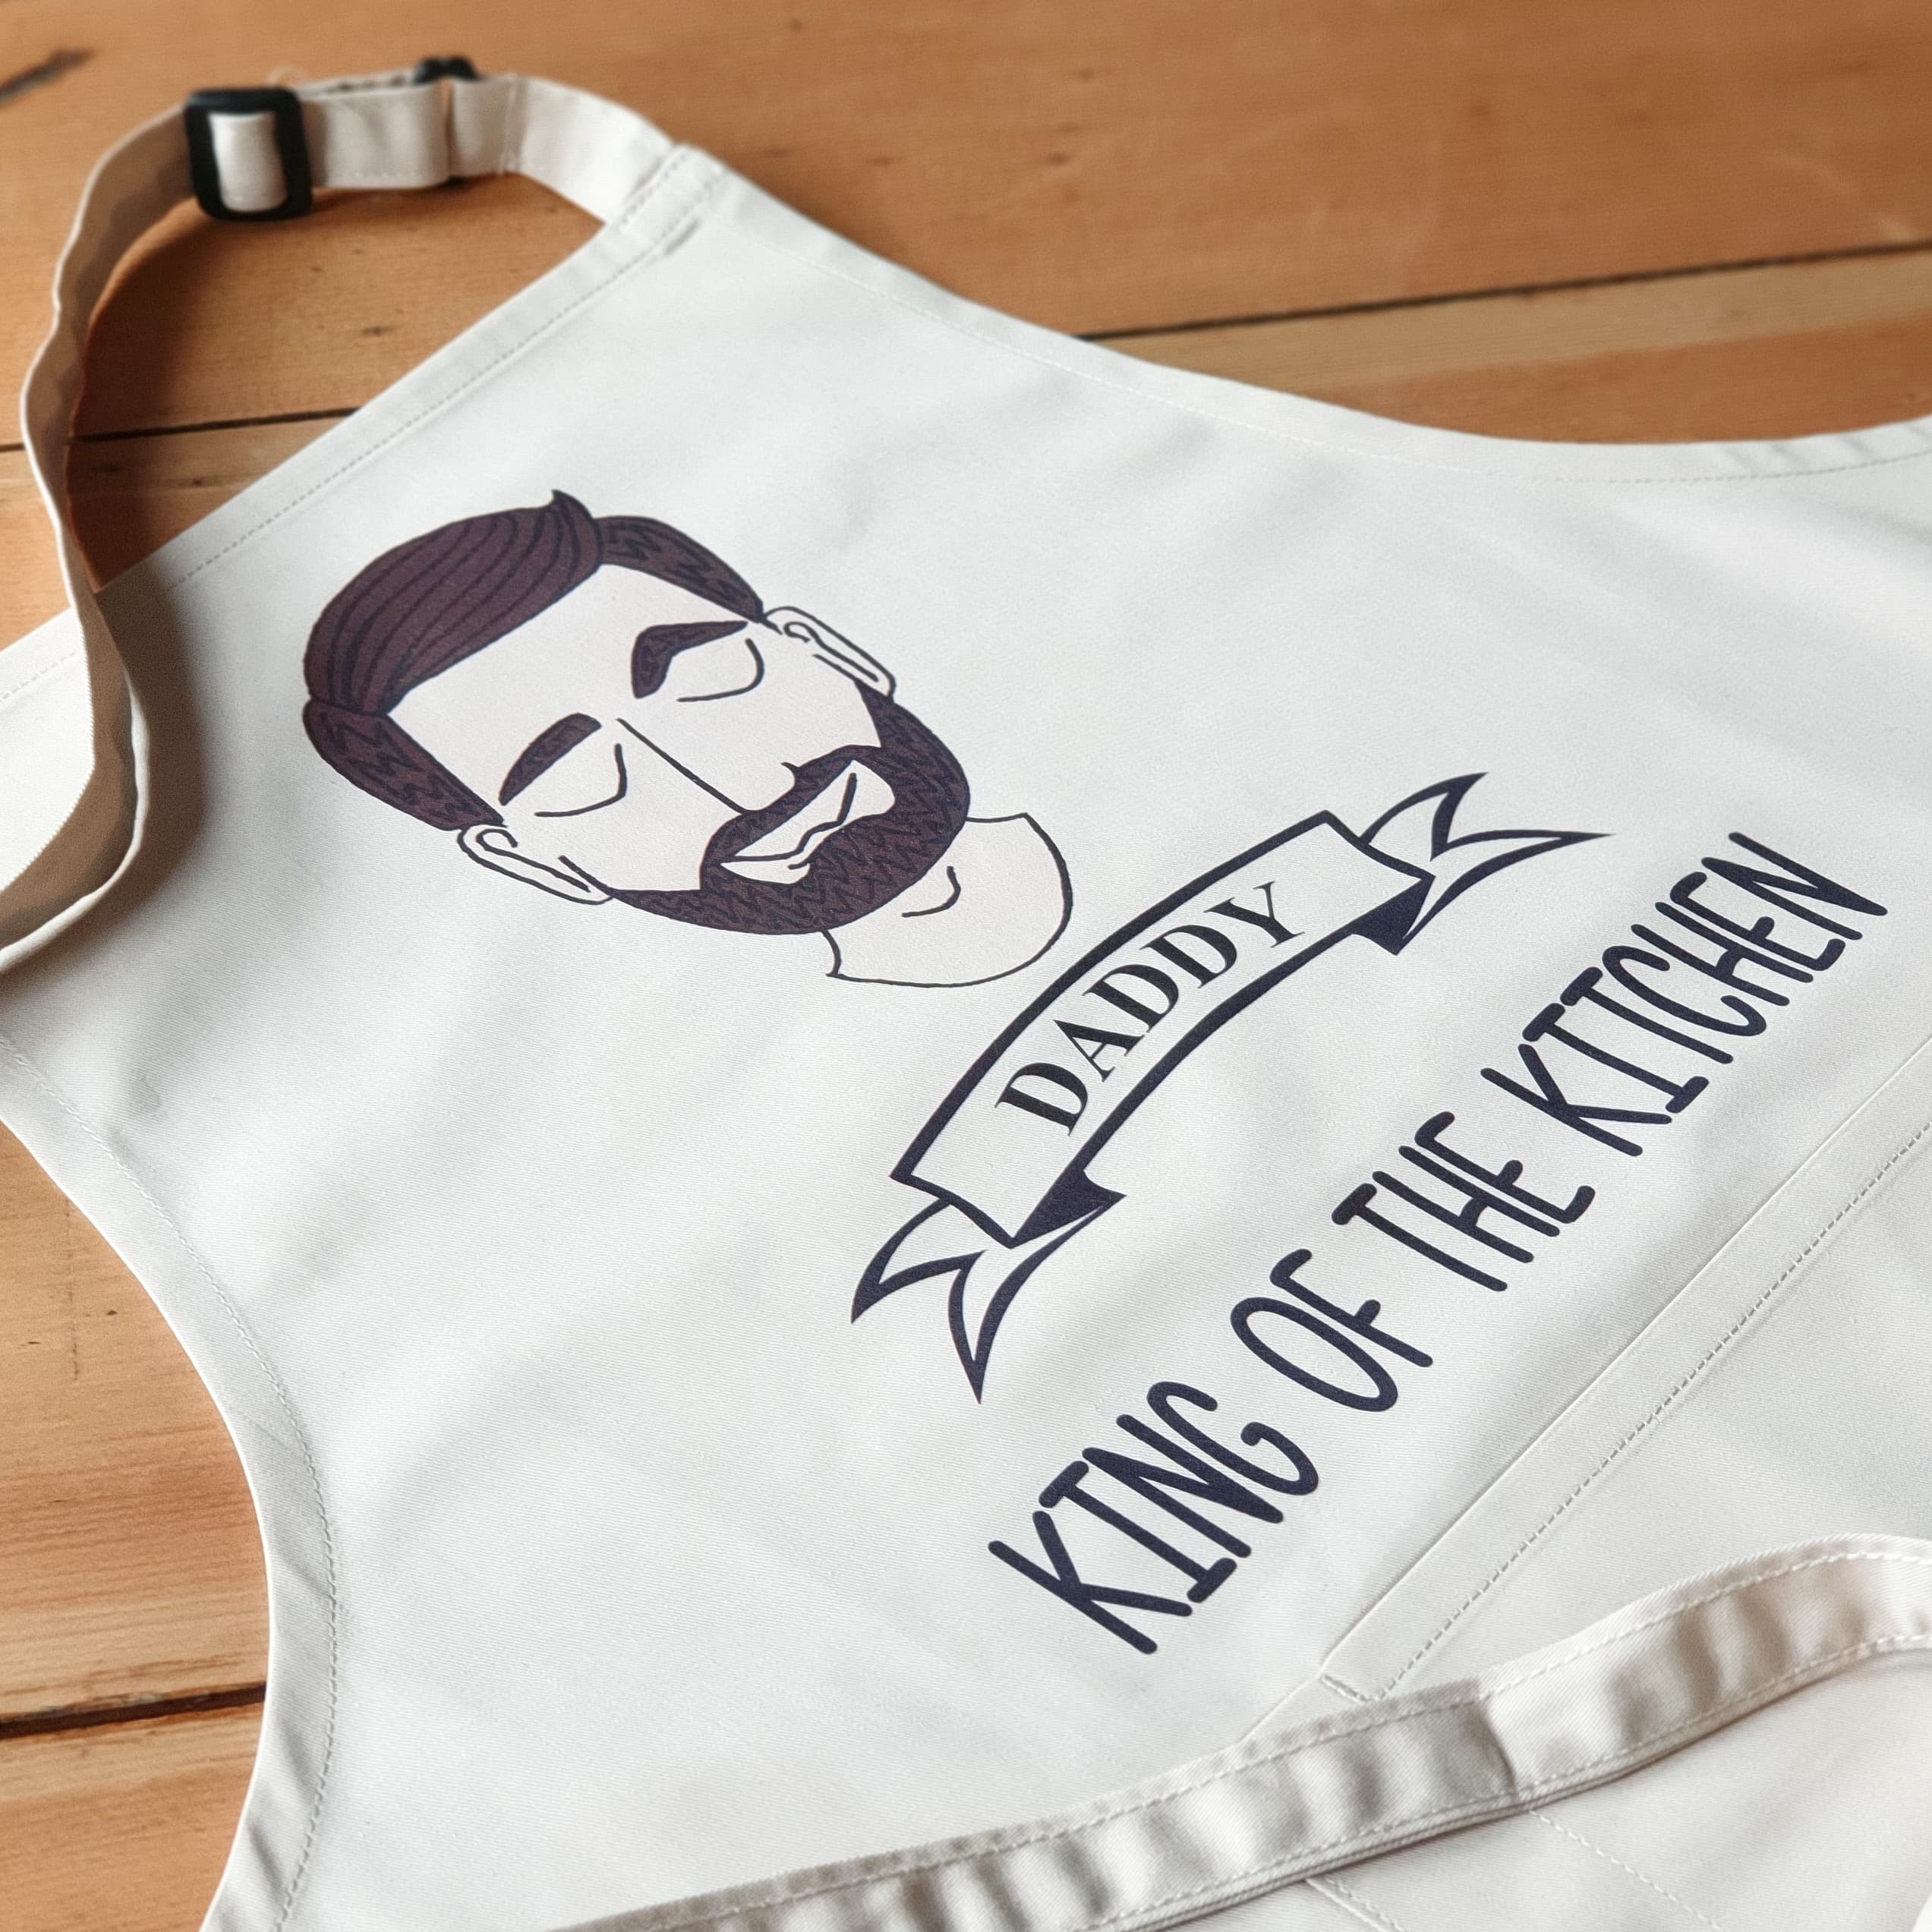 Personalised King of the Kitchen Mens Apron